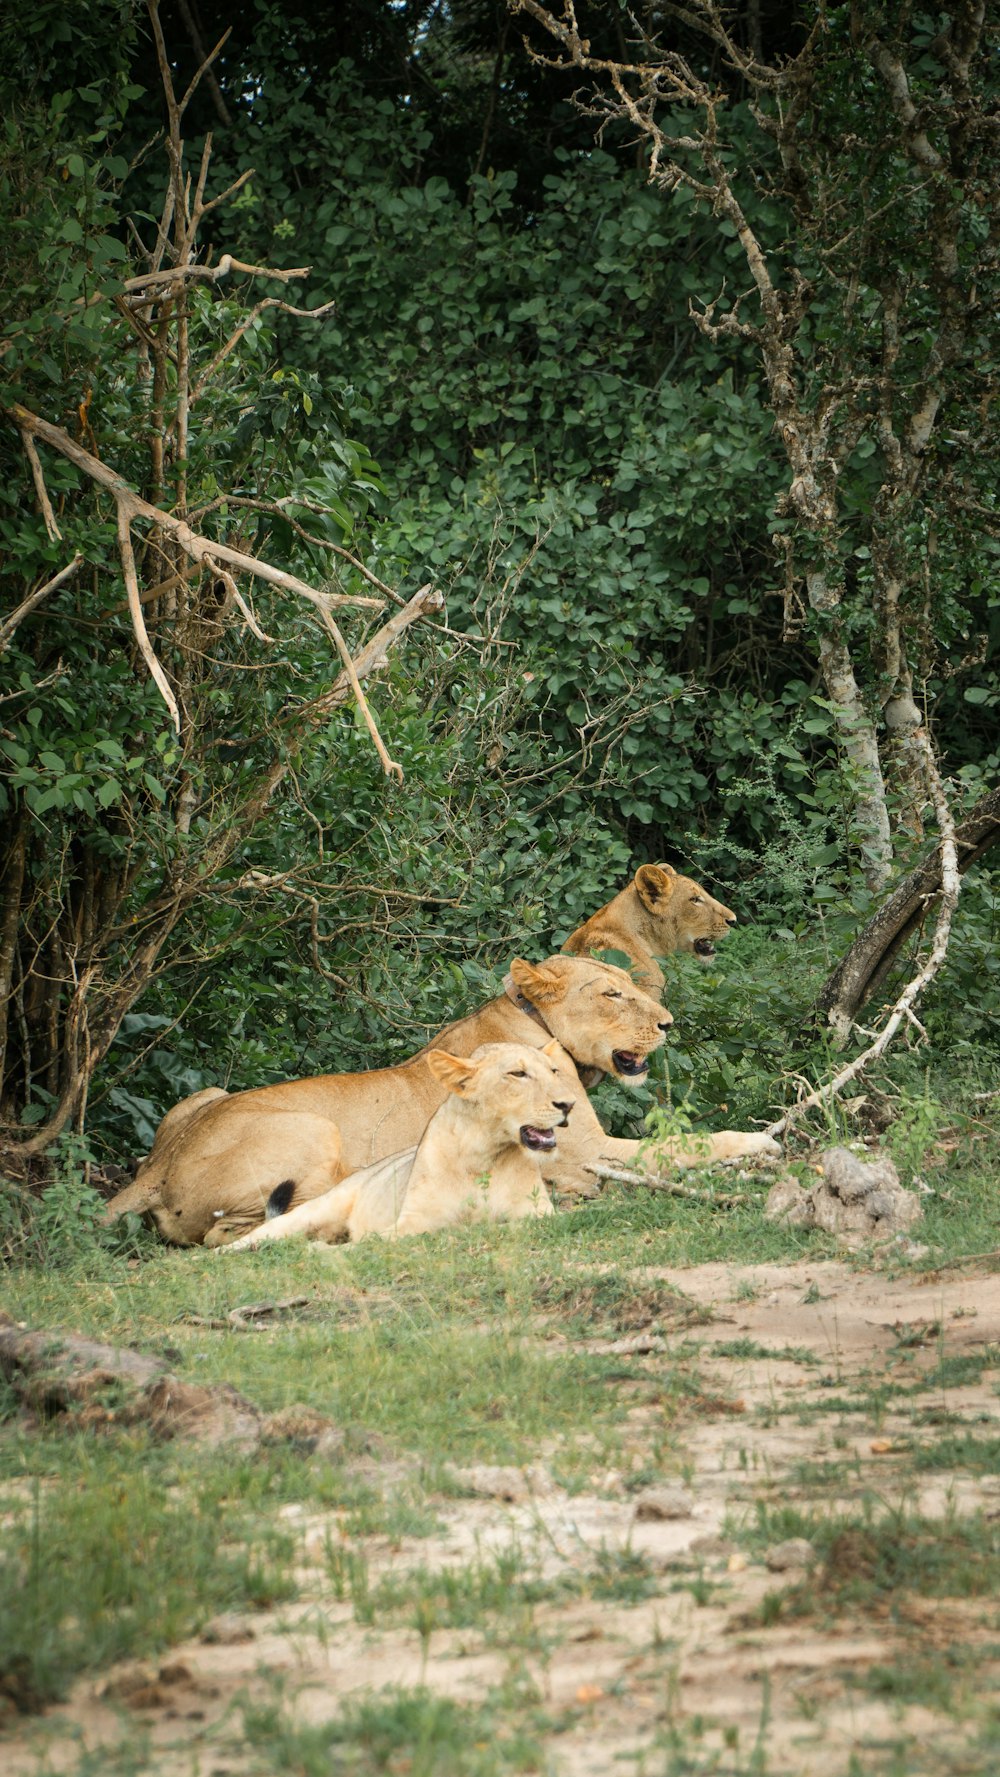 three lions laying down in the grass in front of some trees